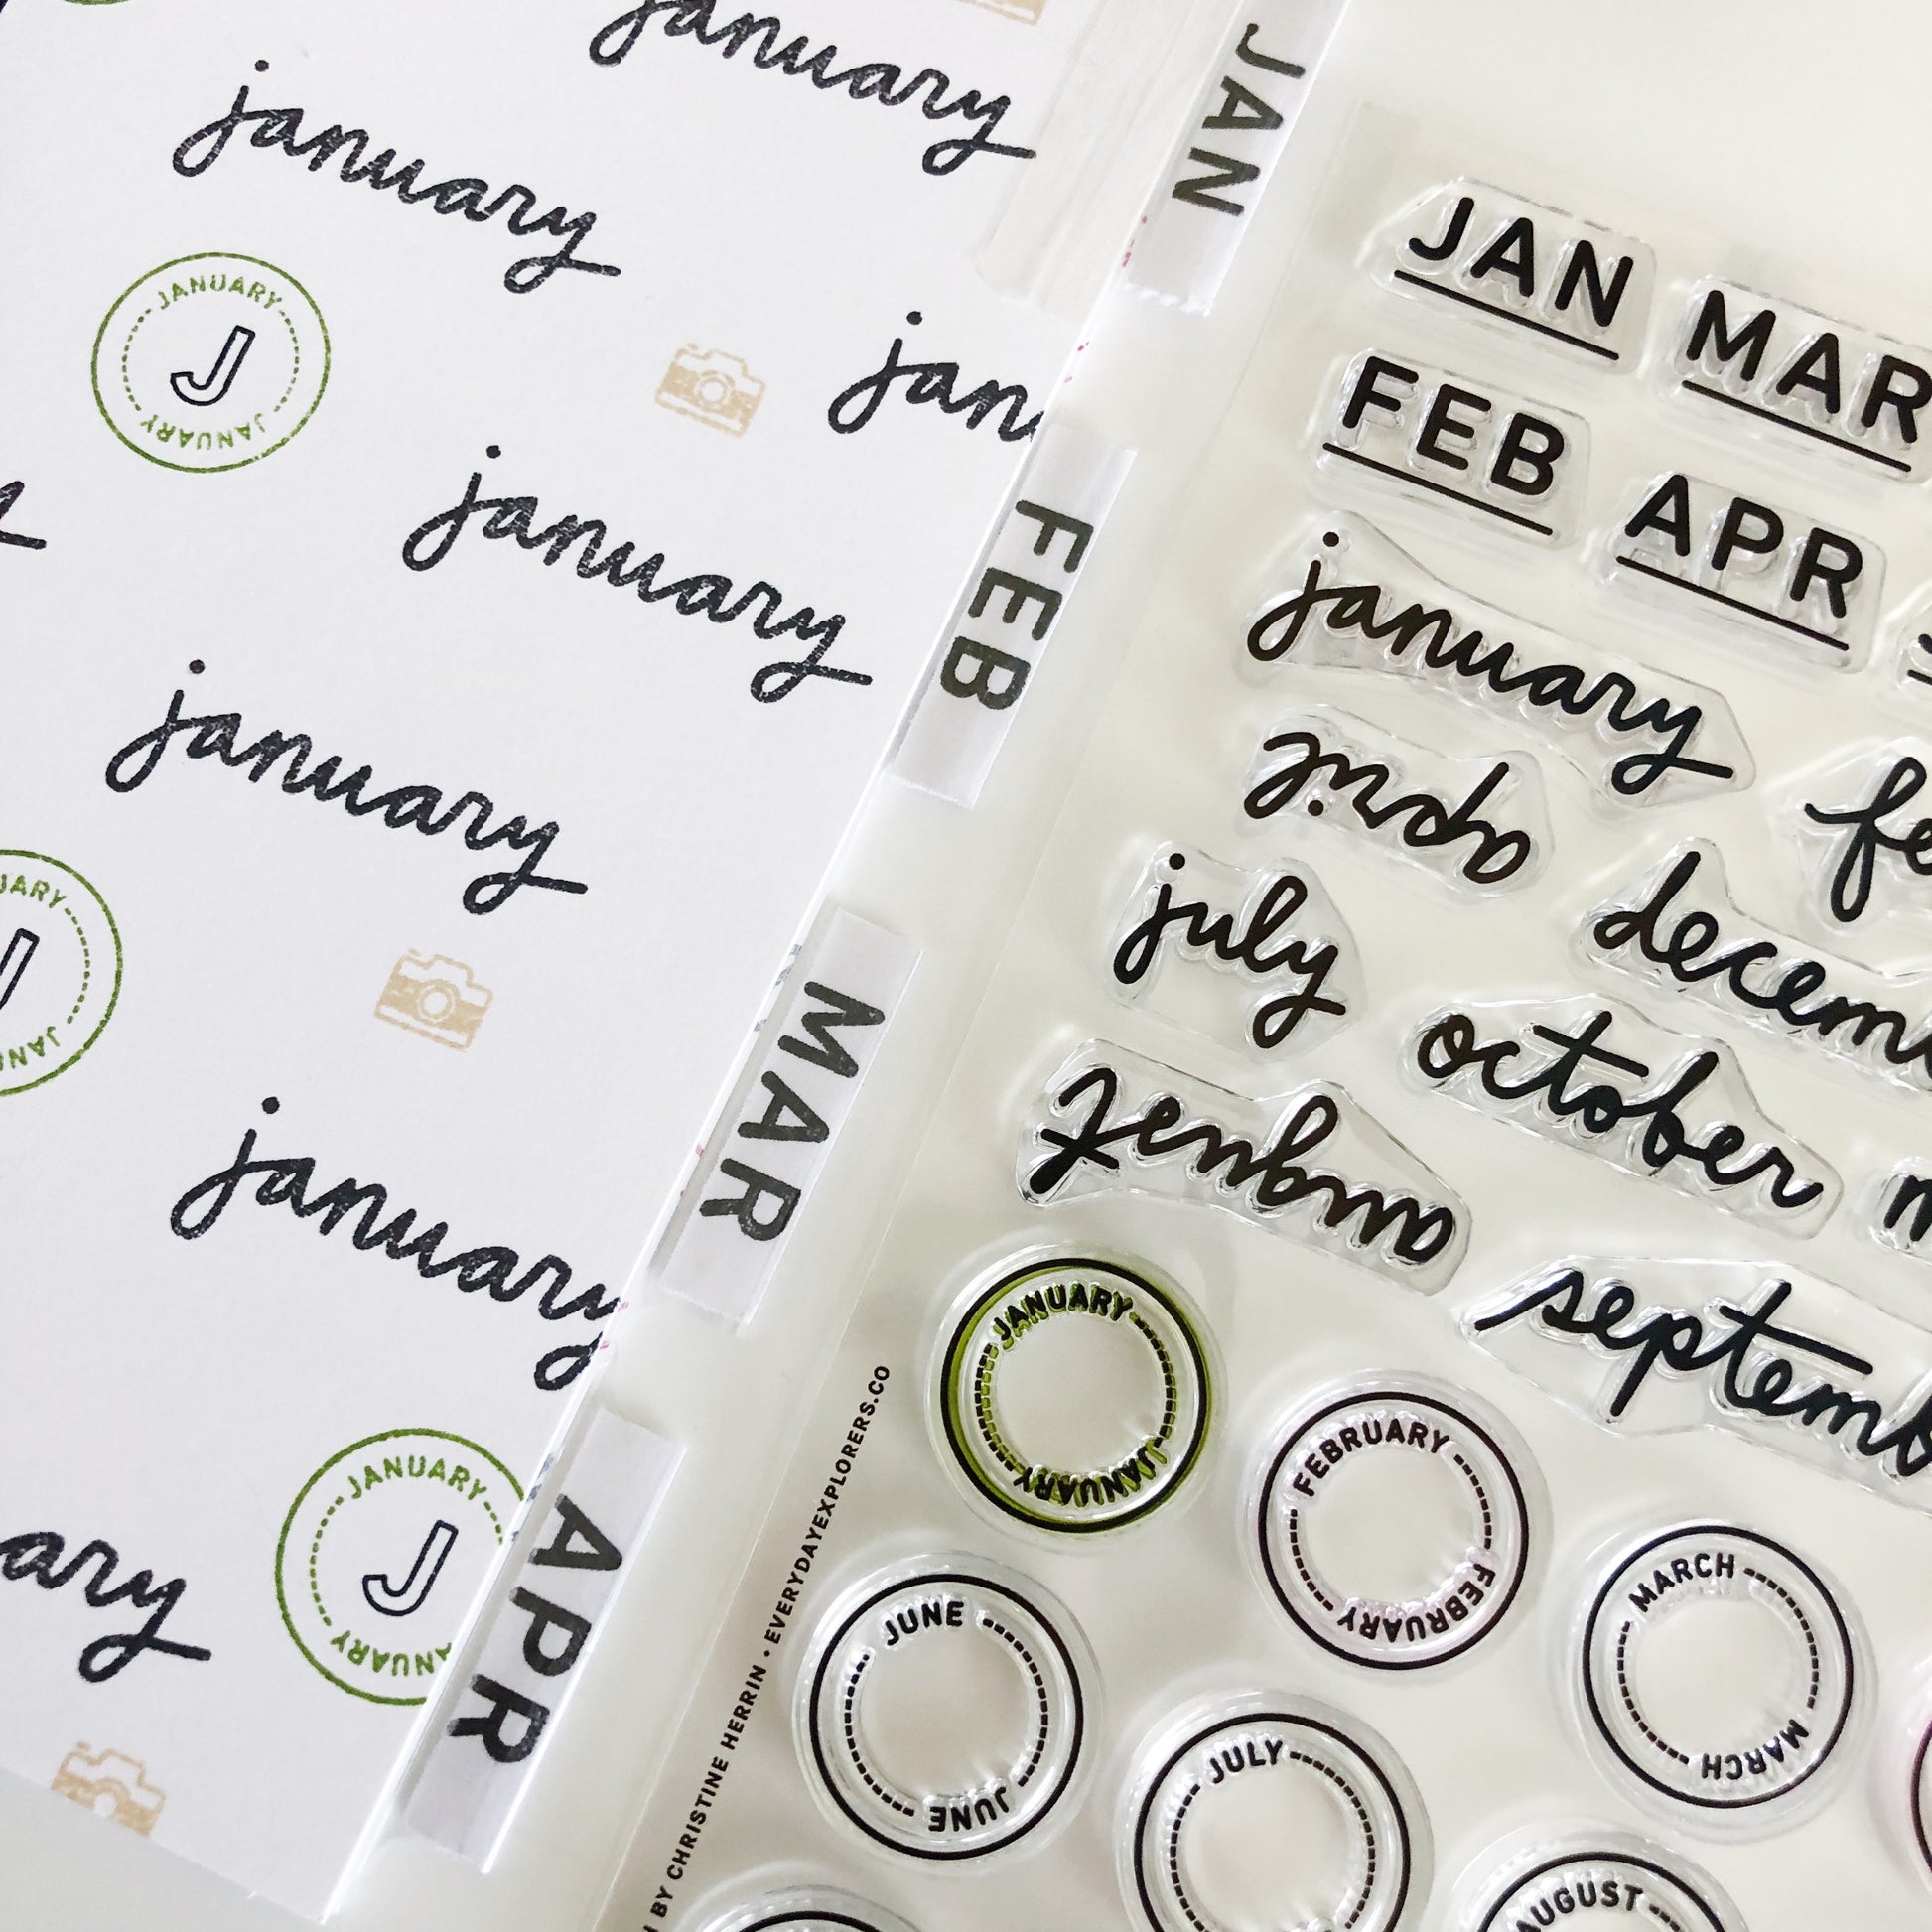 Stamp Subscription First Class Roll - 6 Months - Monthly